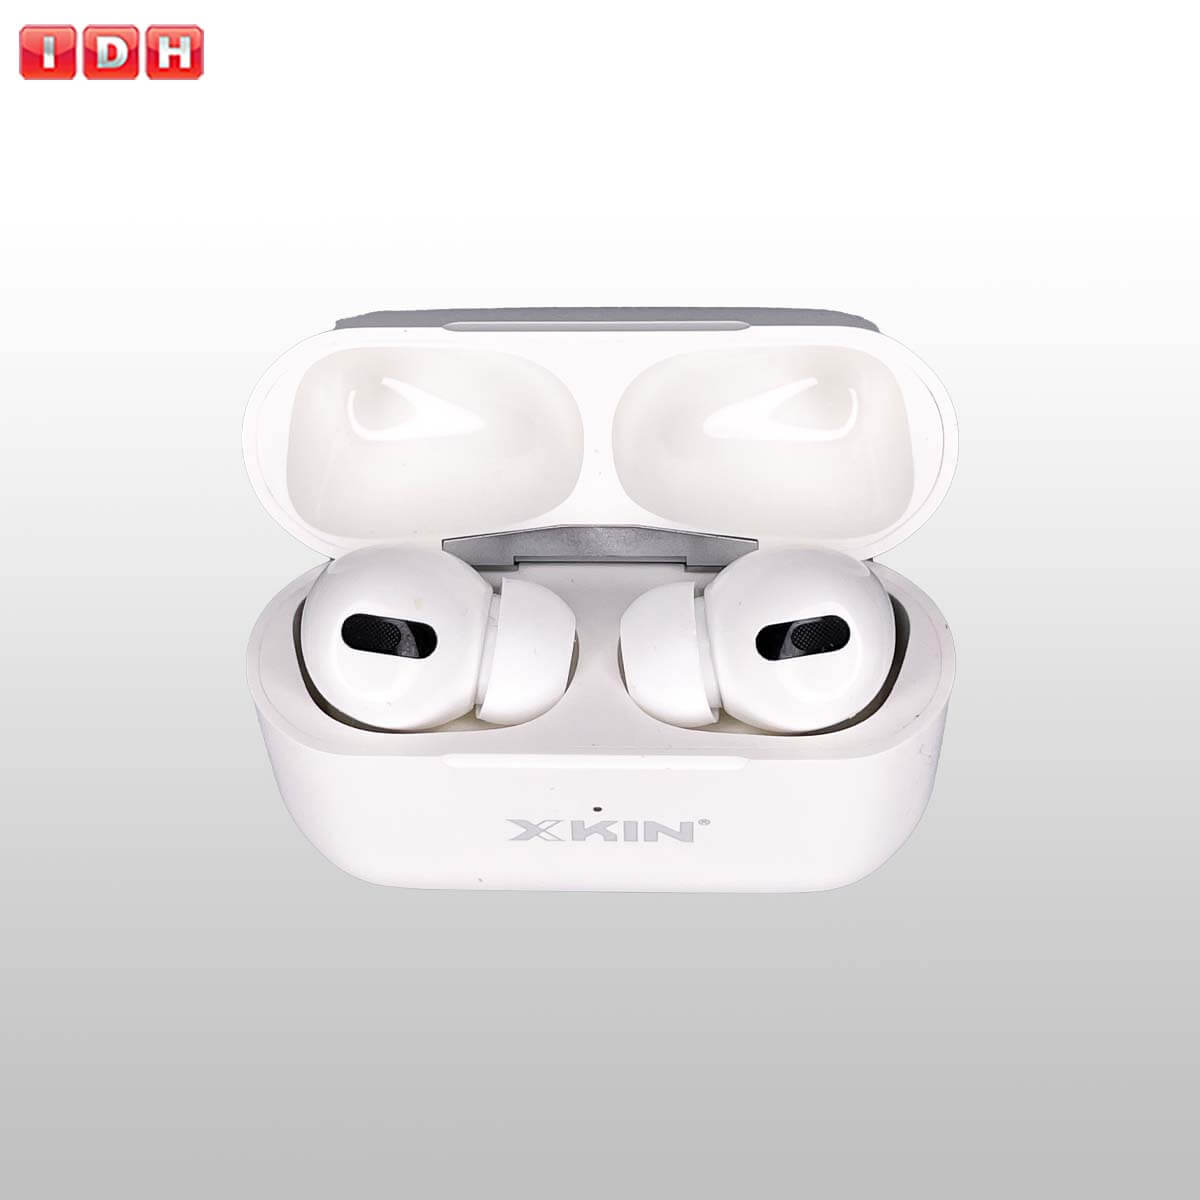 Earbuds pro3 مقرون به صرفه IDH